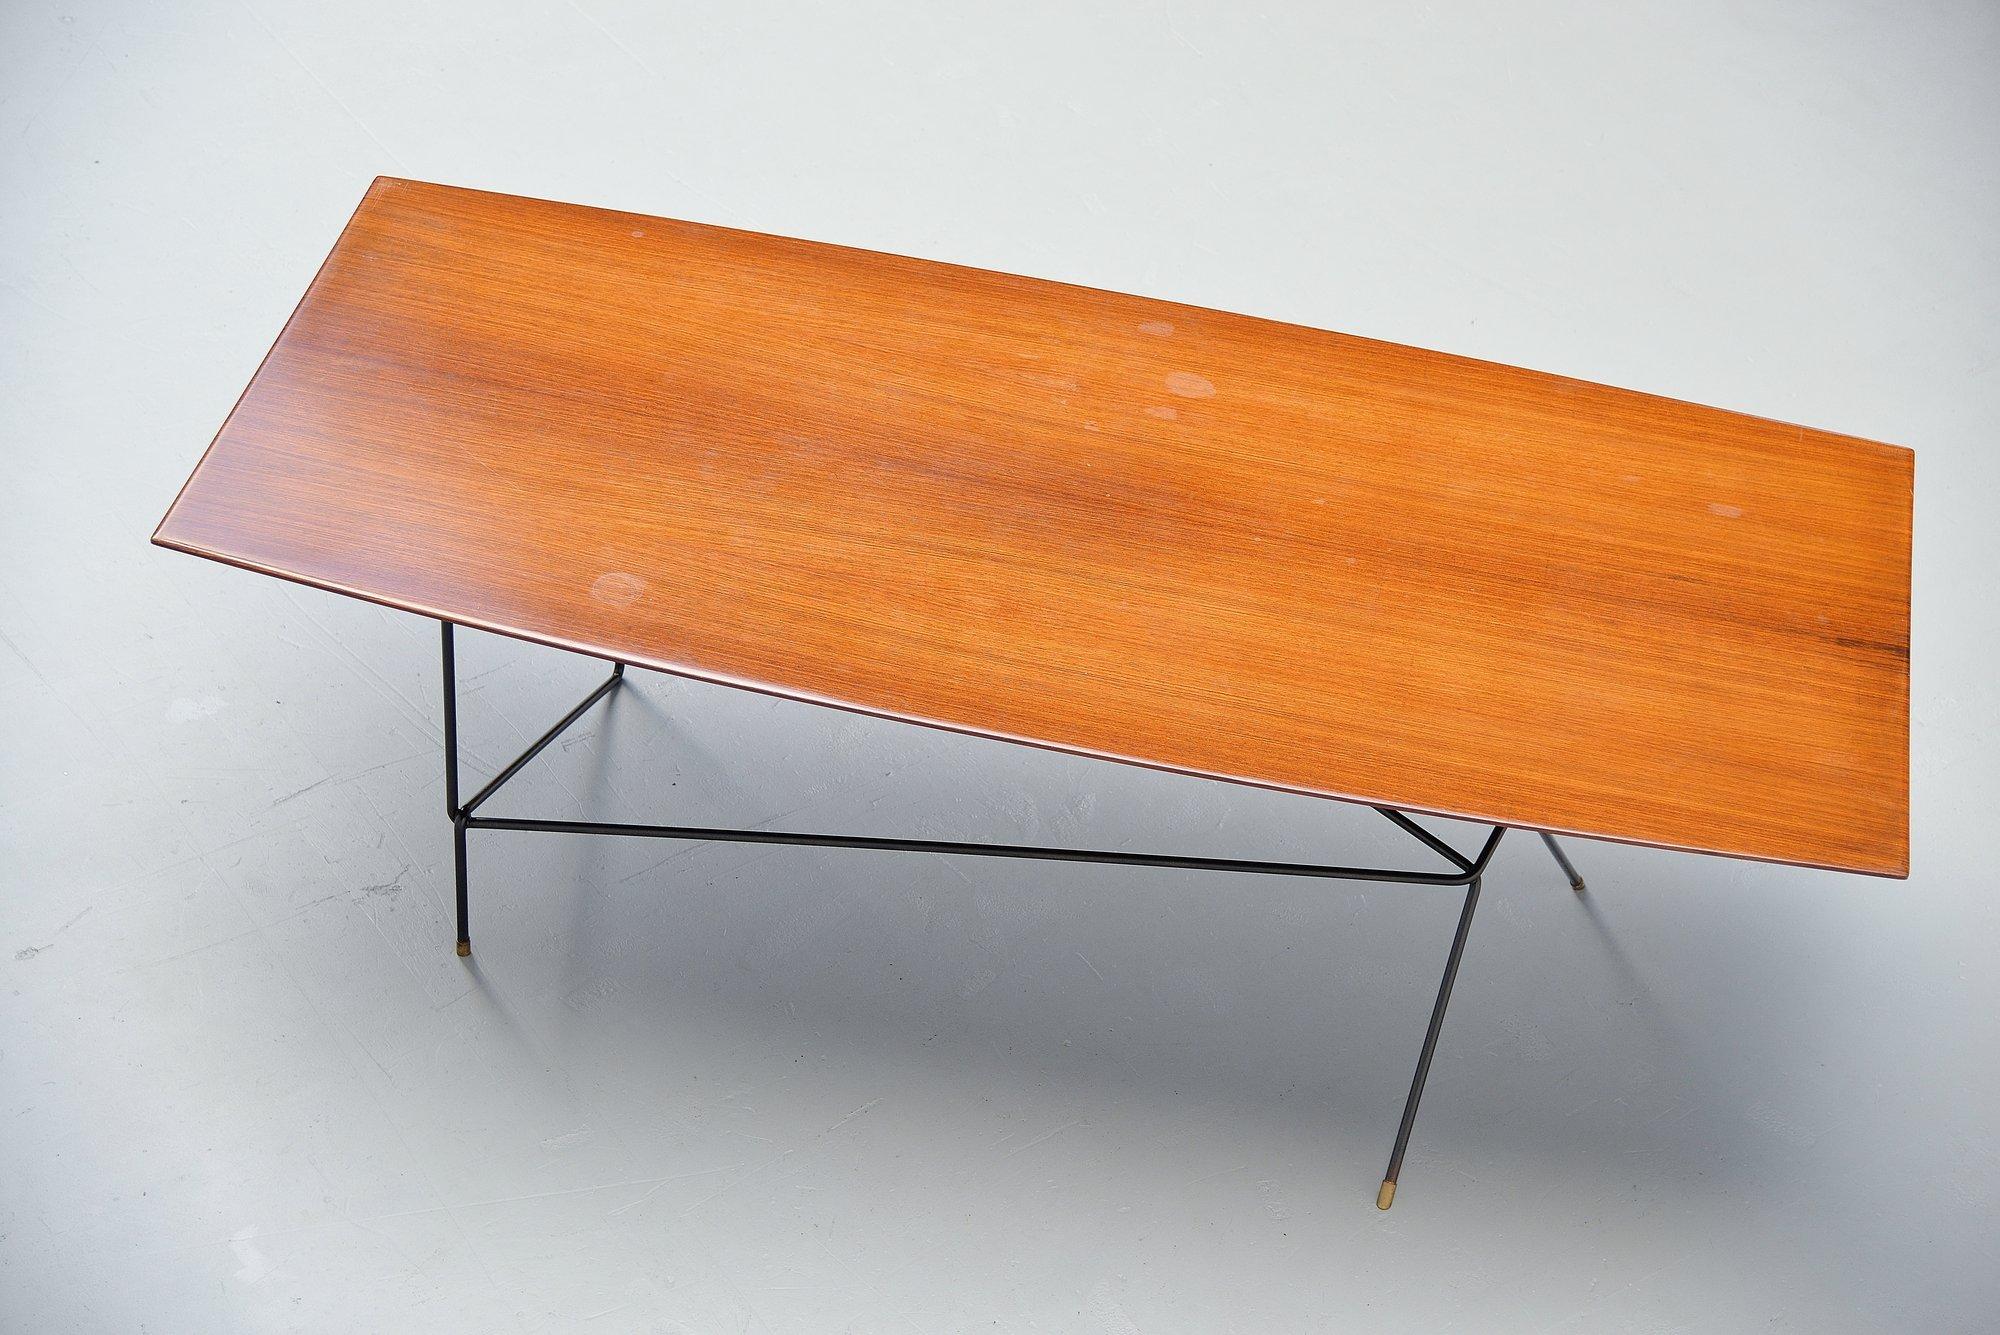 Cold-Painted Daniele Calabi Writing Desk Table, Italy, 1950